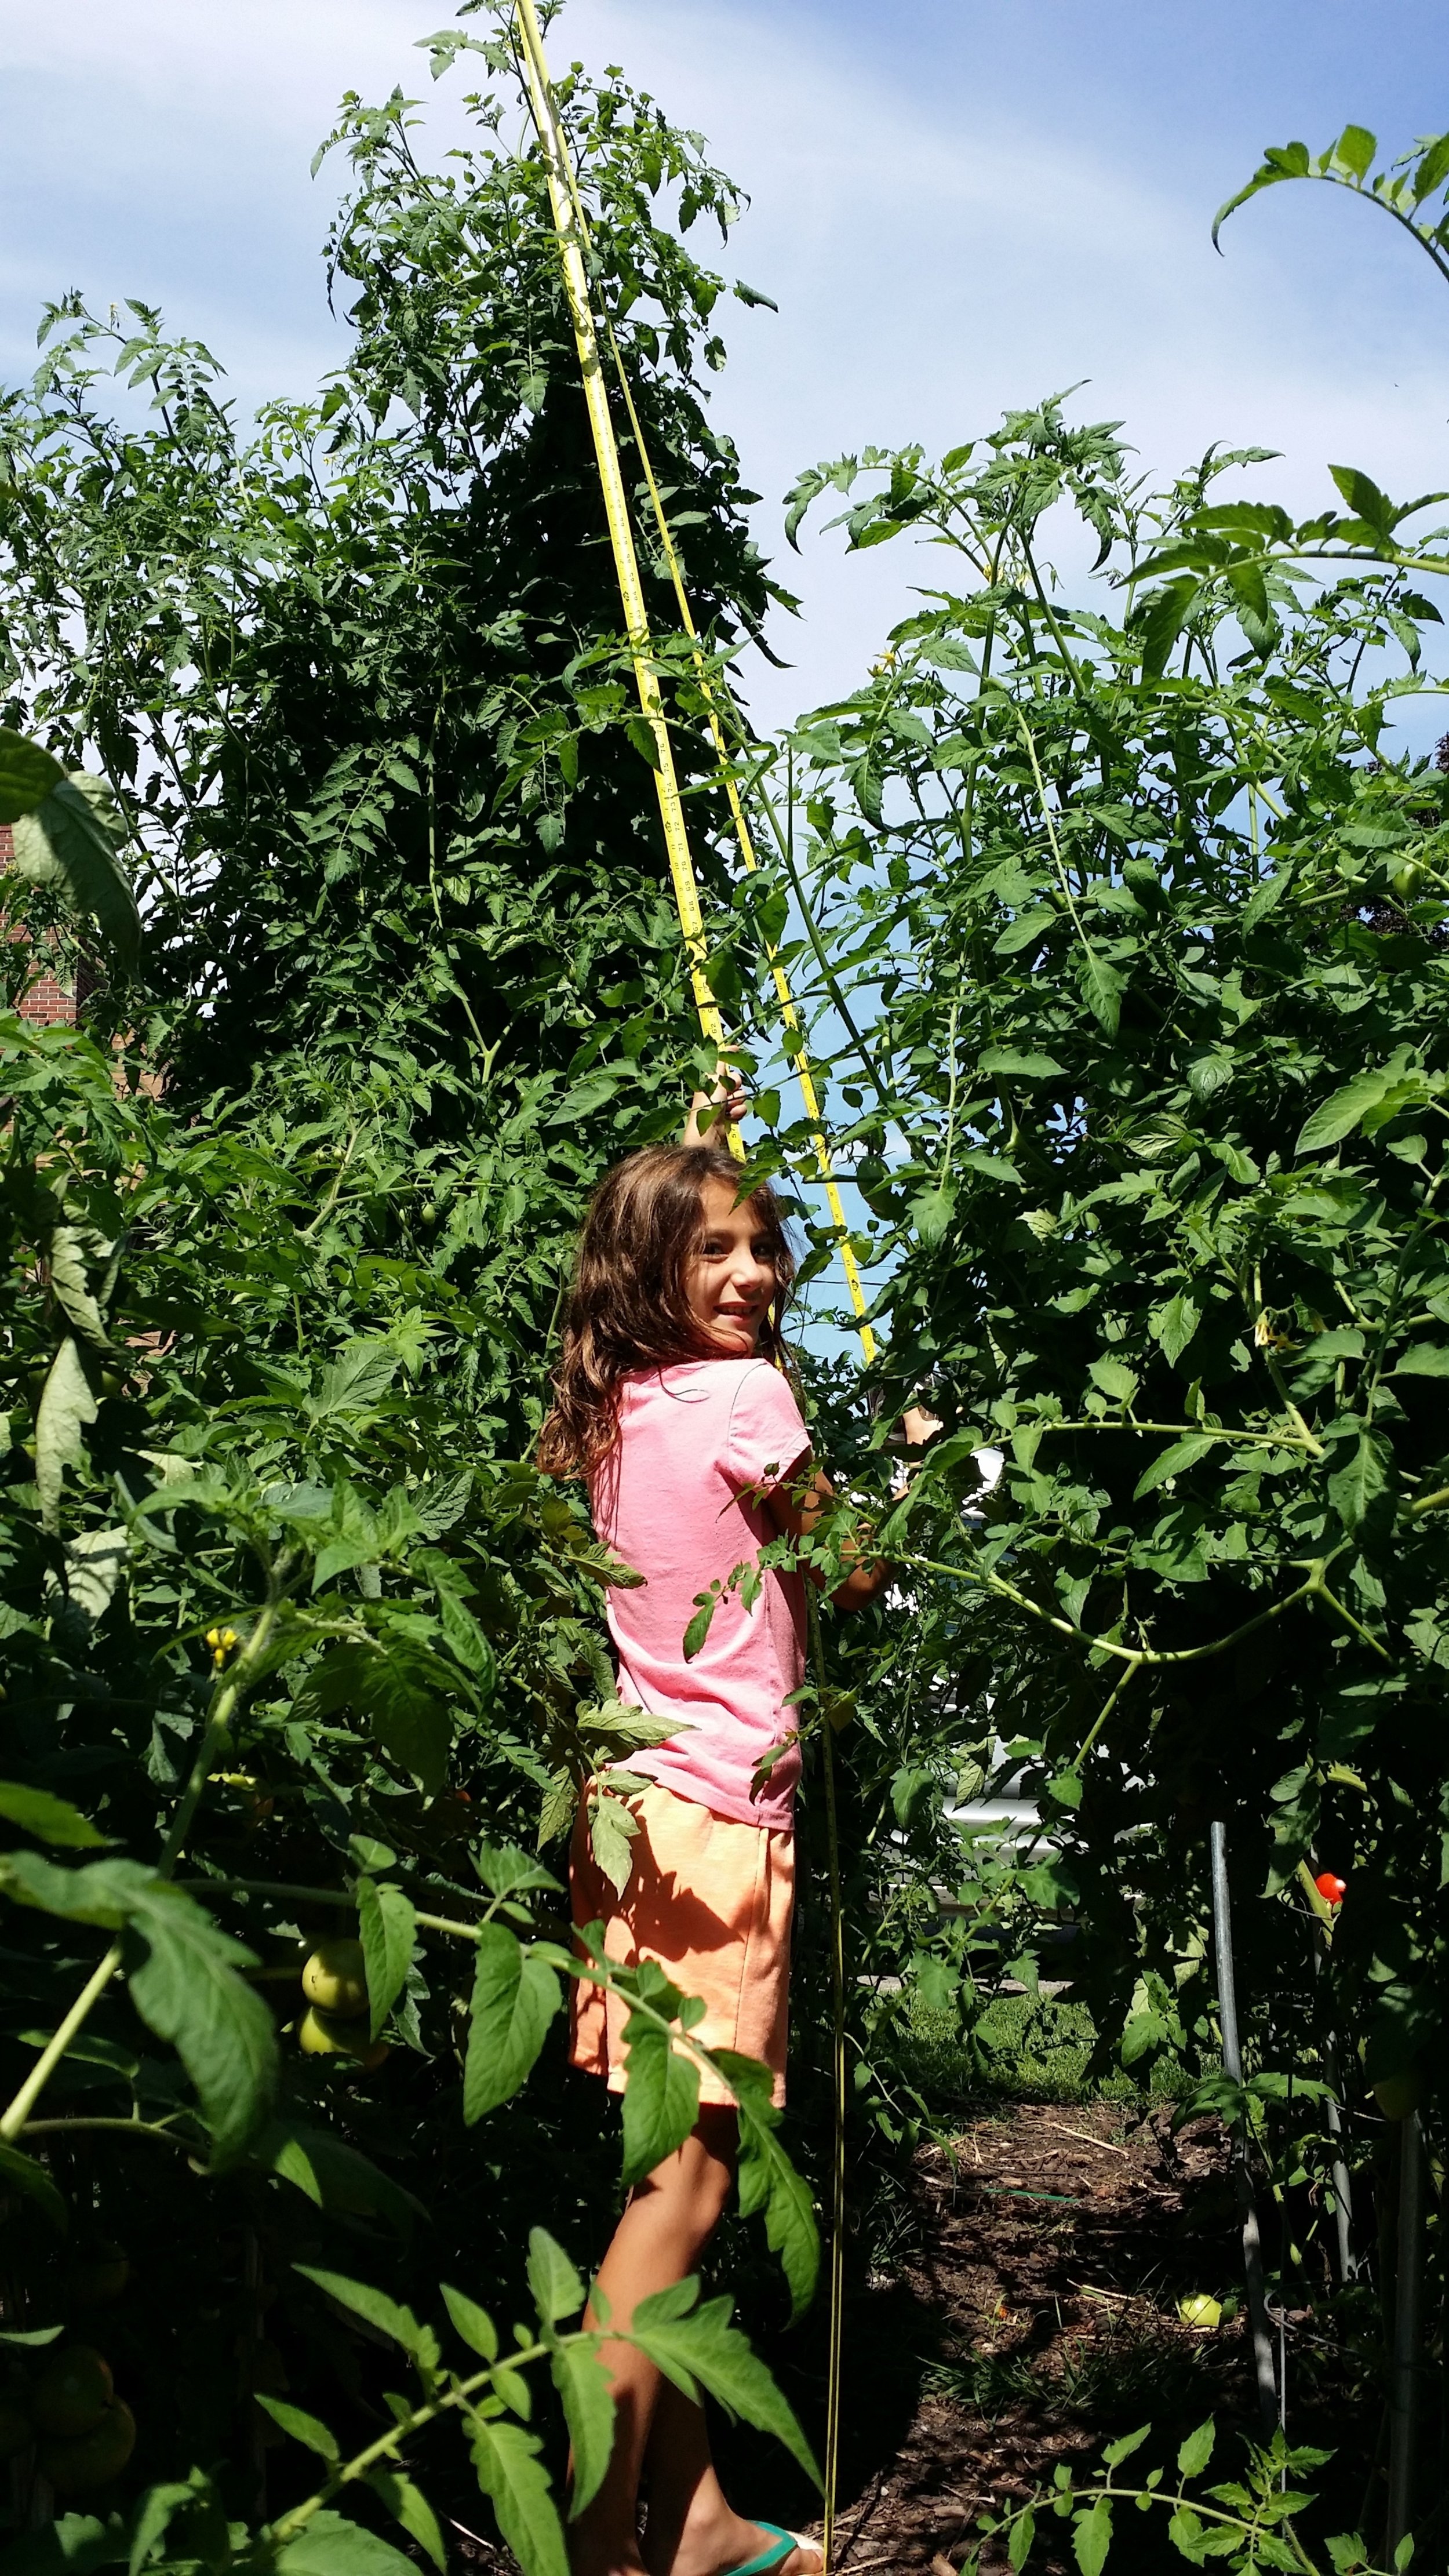  Tomato plants over 11 ft. tall! 